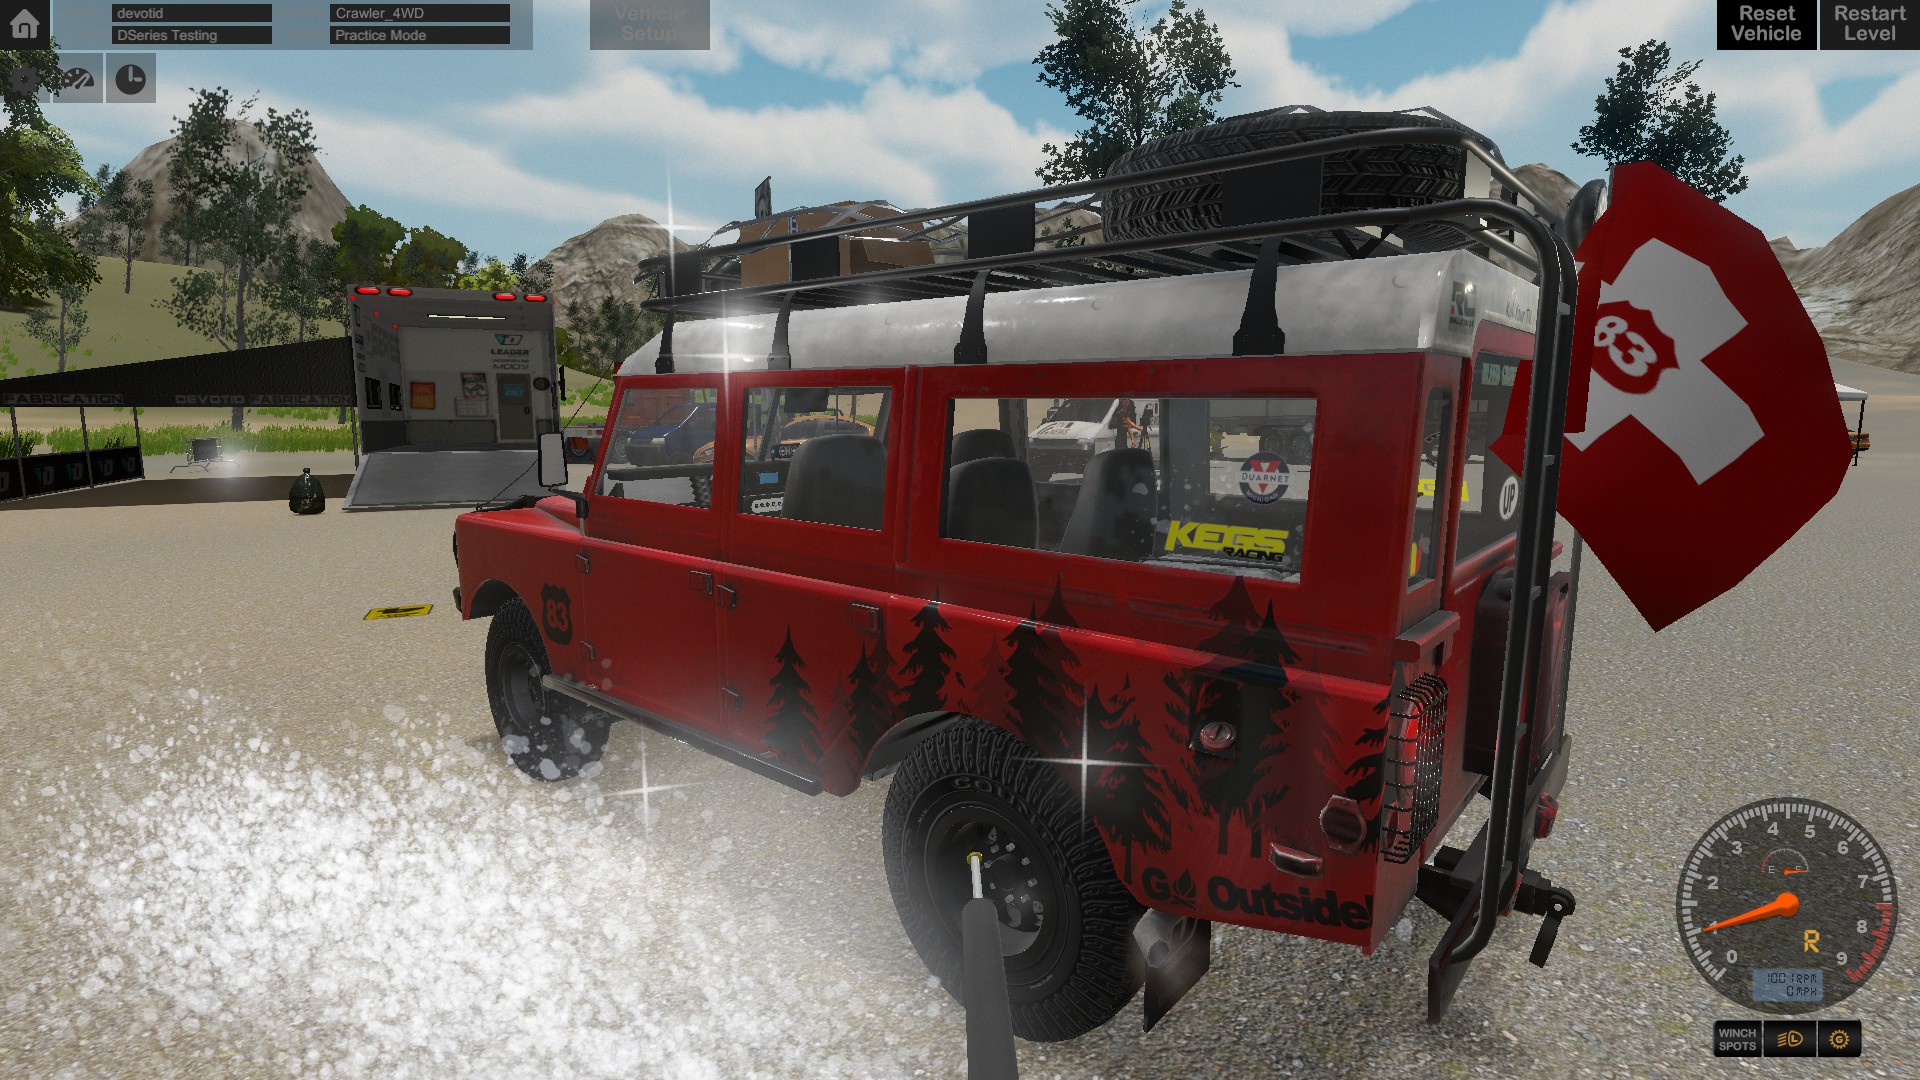 Offroad Vehicle Simulation download